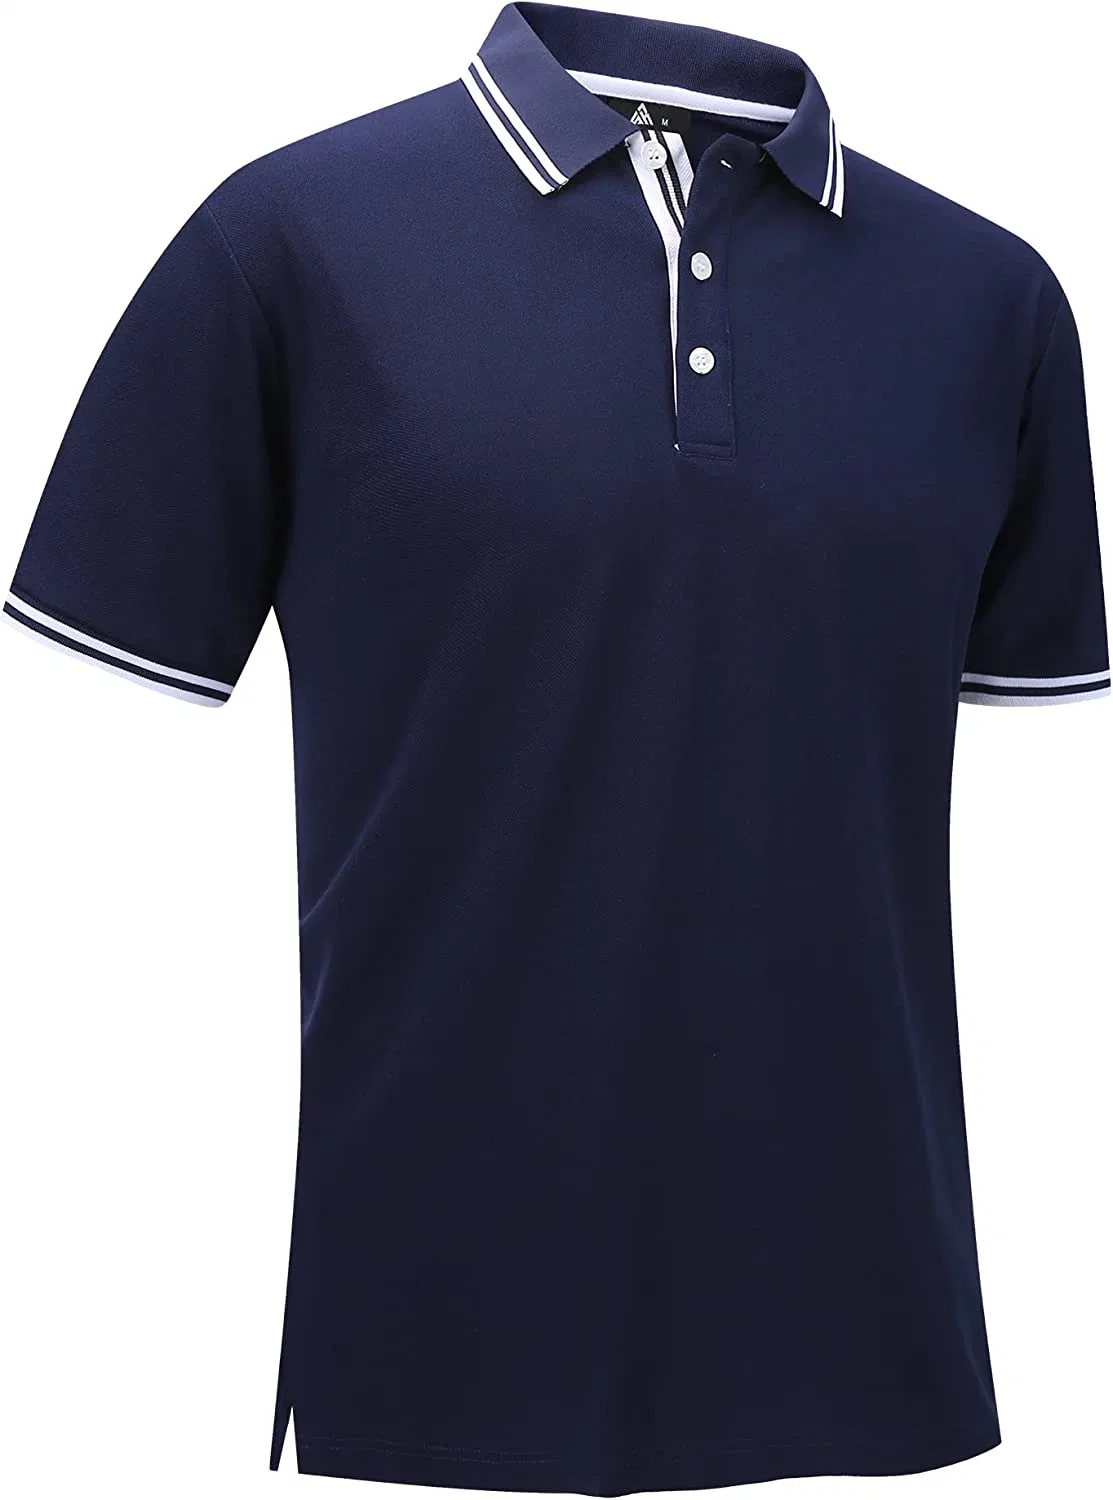 Golf Polo for Men Short Sleeve Moisture Wicking Summer Casual Collared Shirts Tennis Shirts